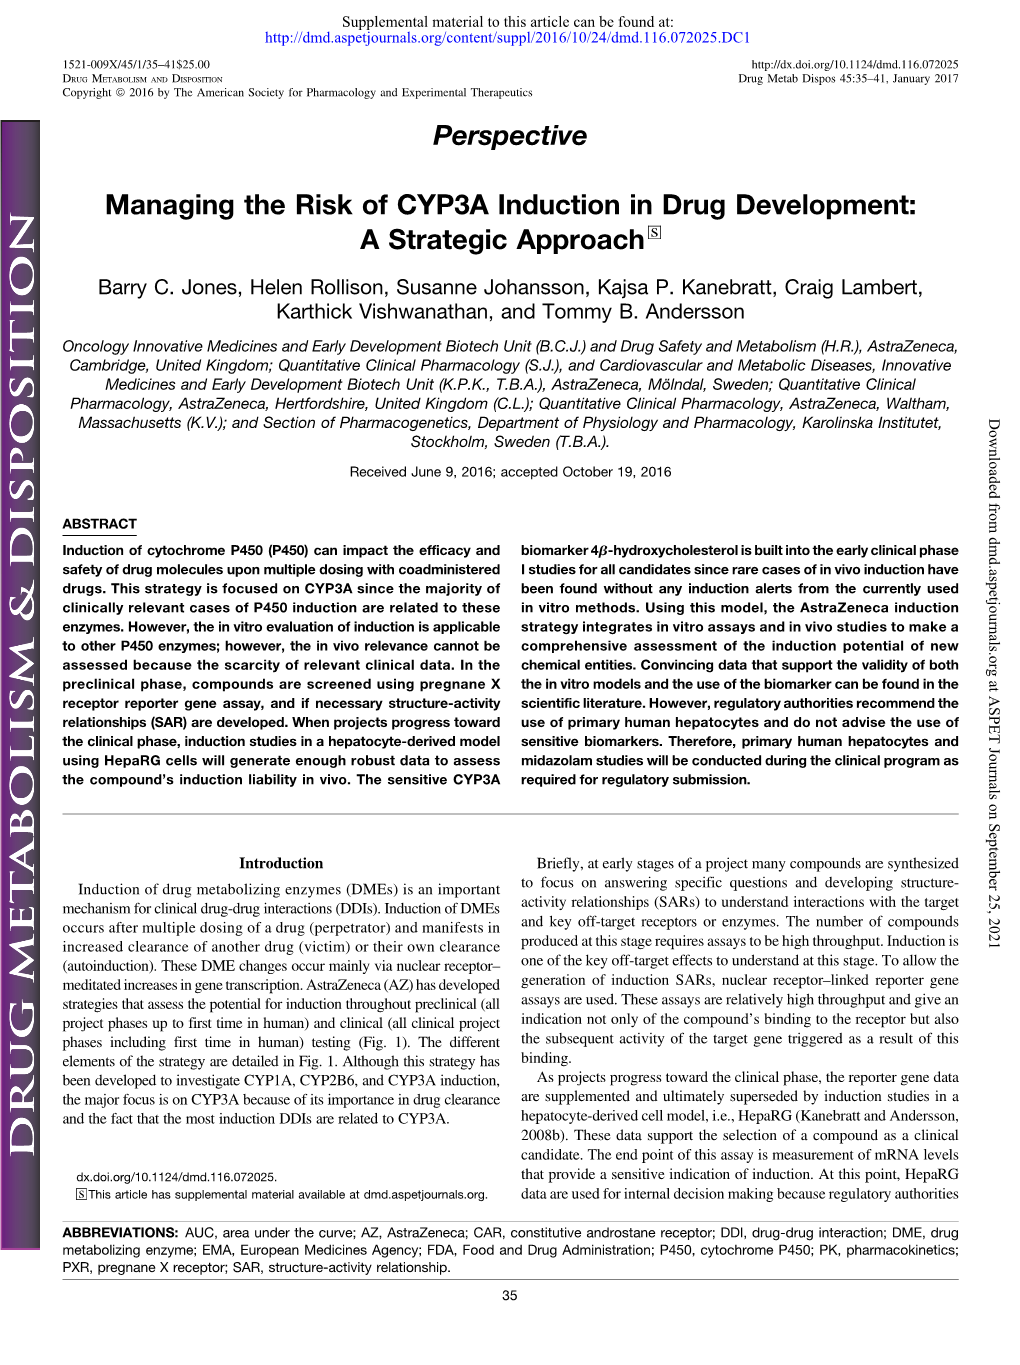 Managing the Risk of CYP3A Induction in Drug Development: a Strategic Approach S